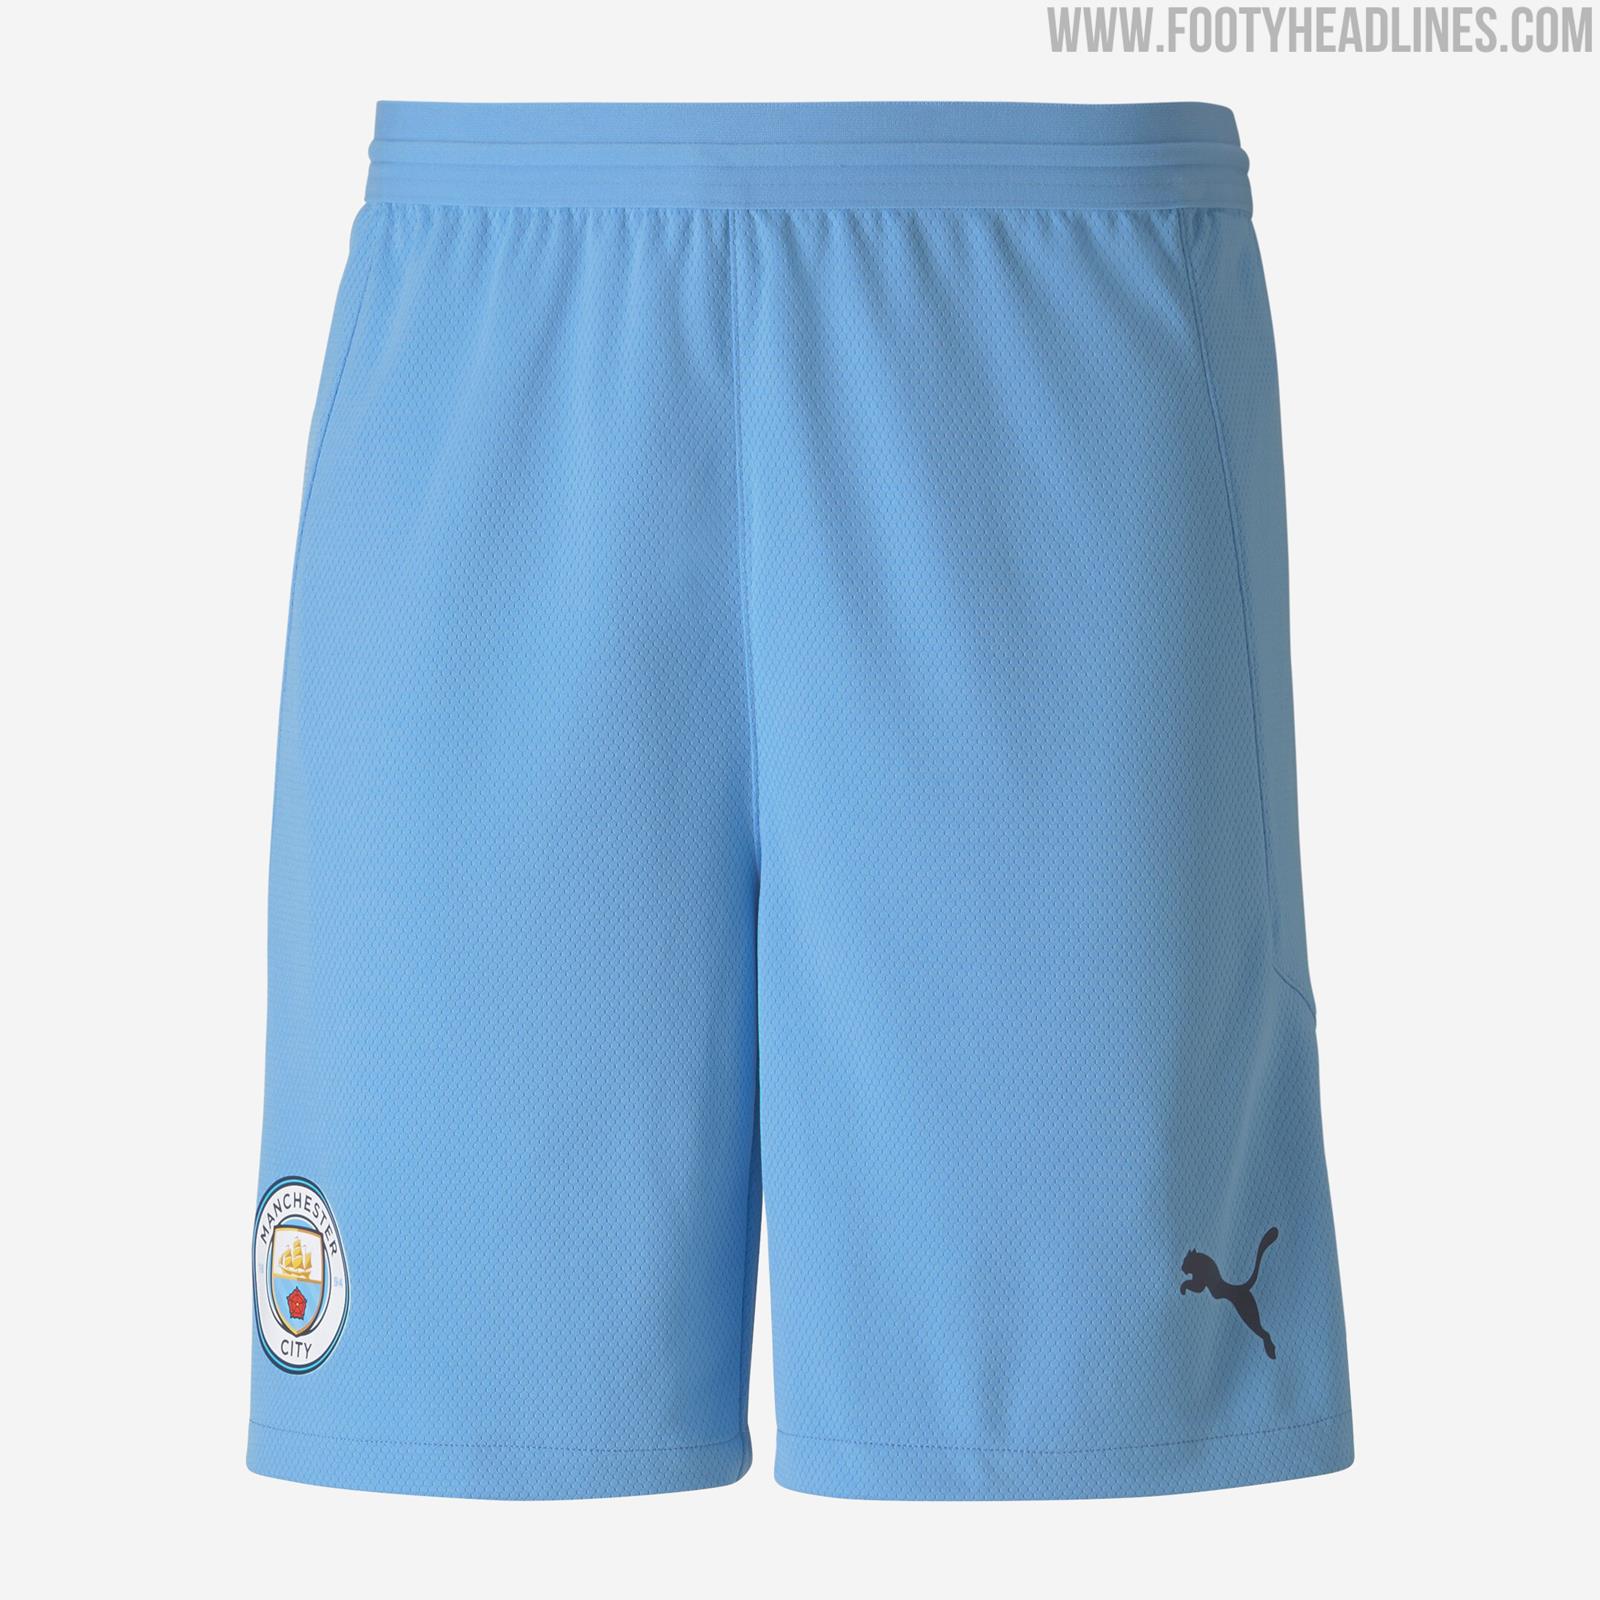 Manchester City 20-21 Home Kit Released - Footy Headlines